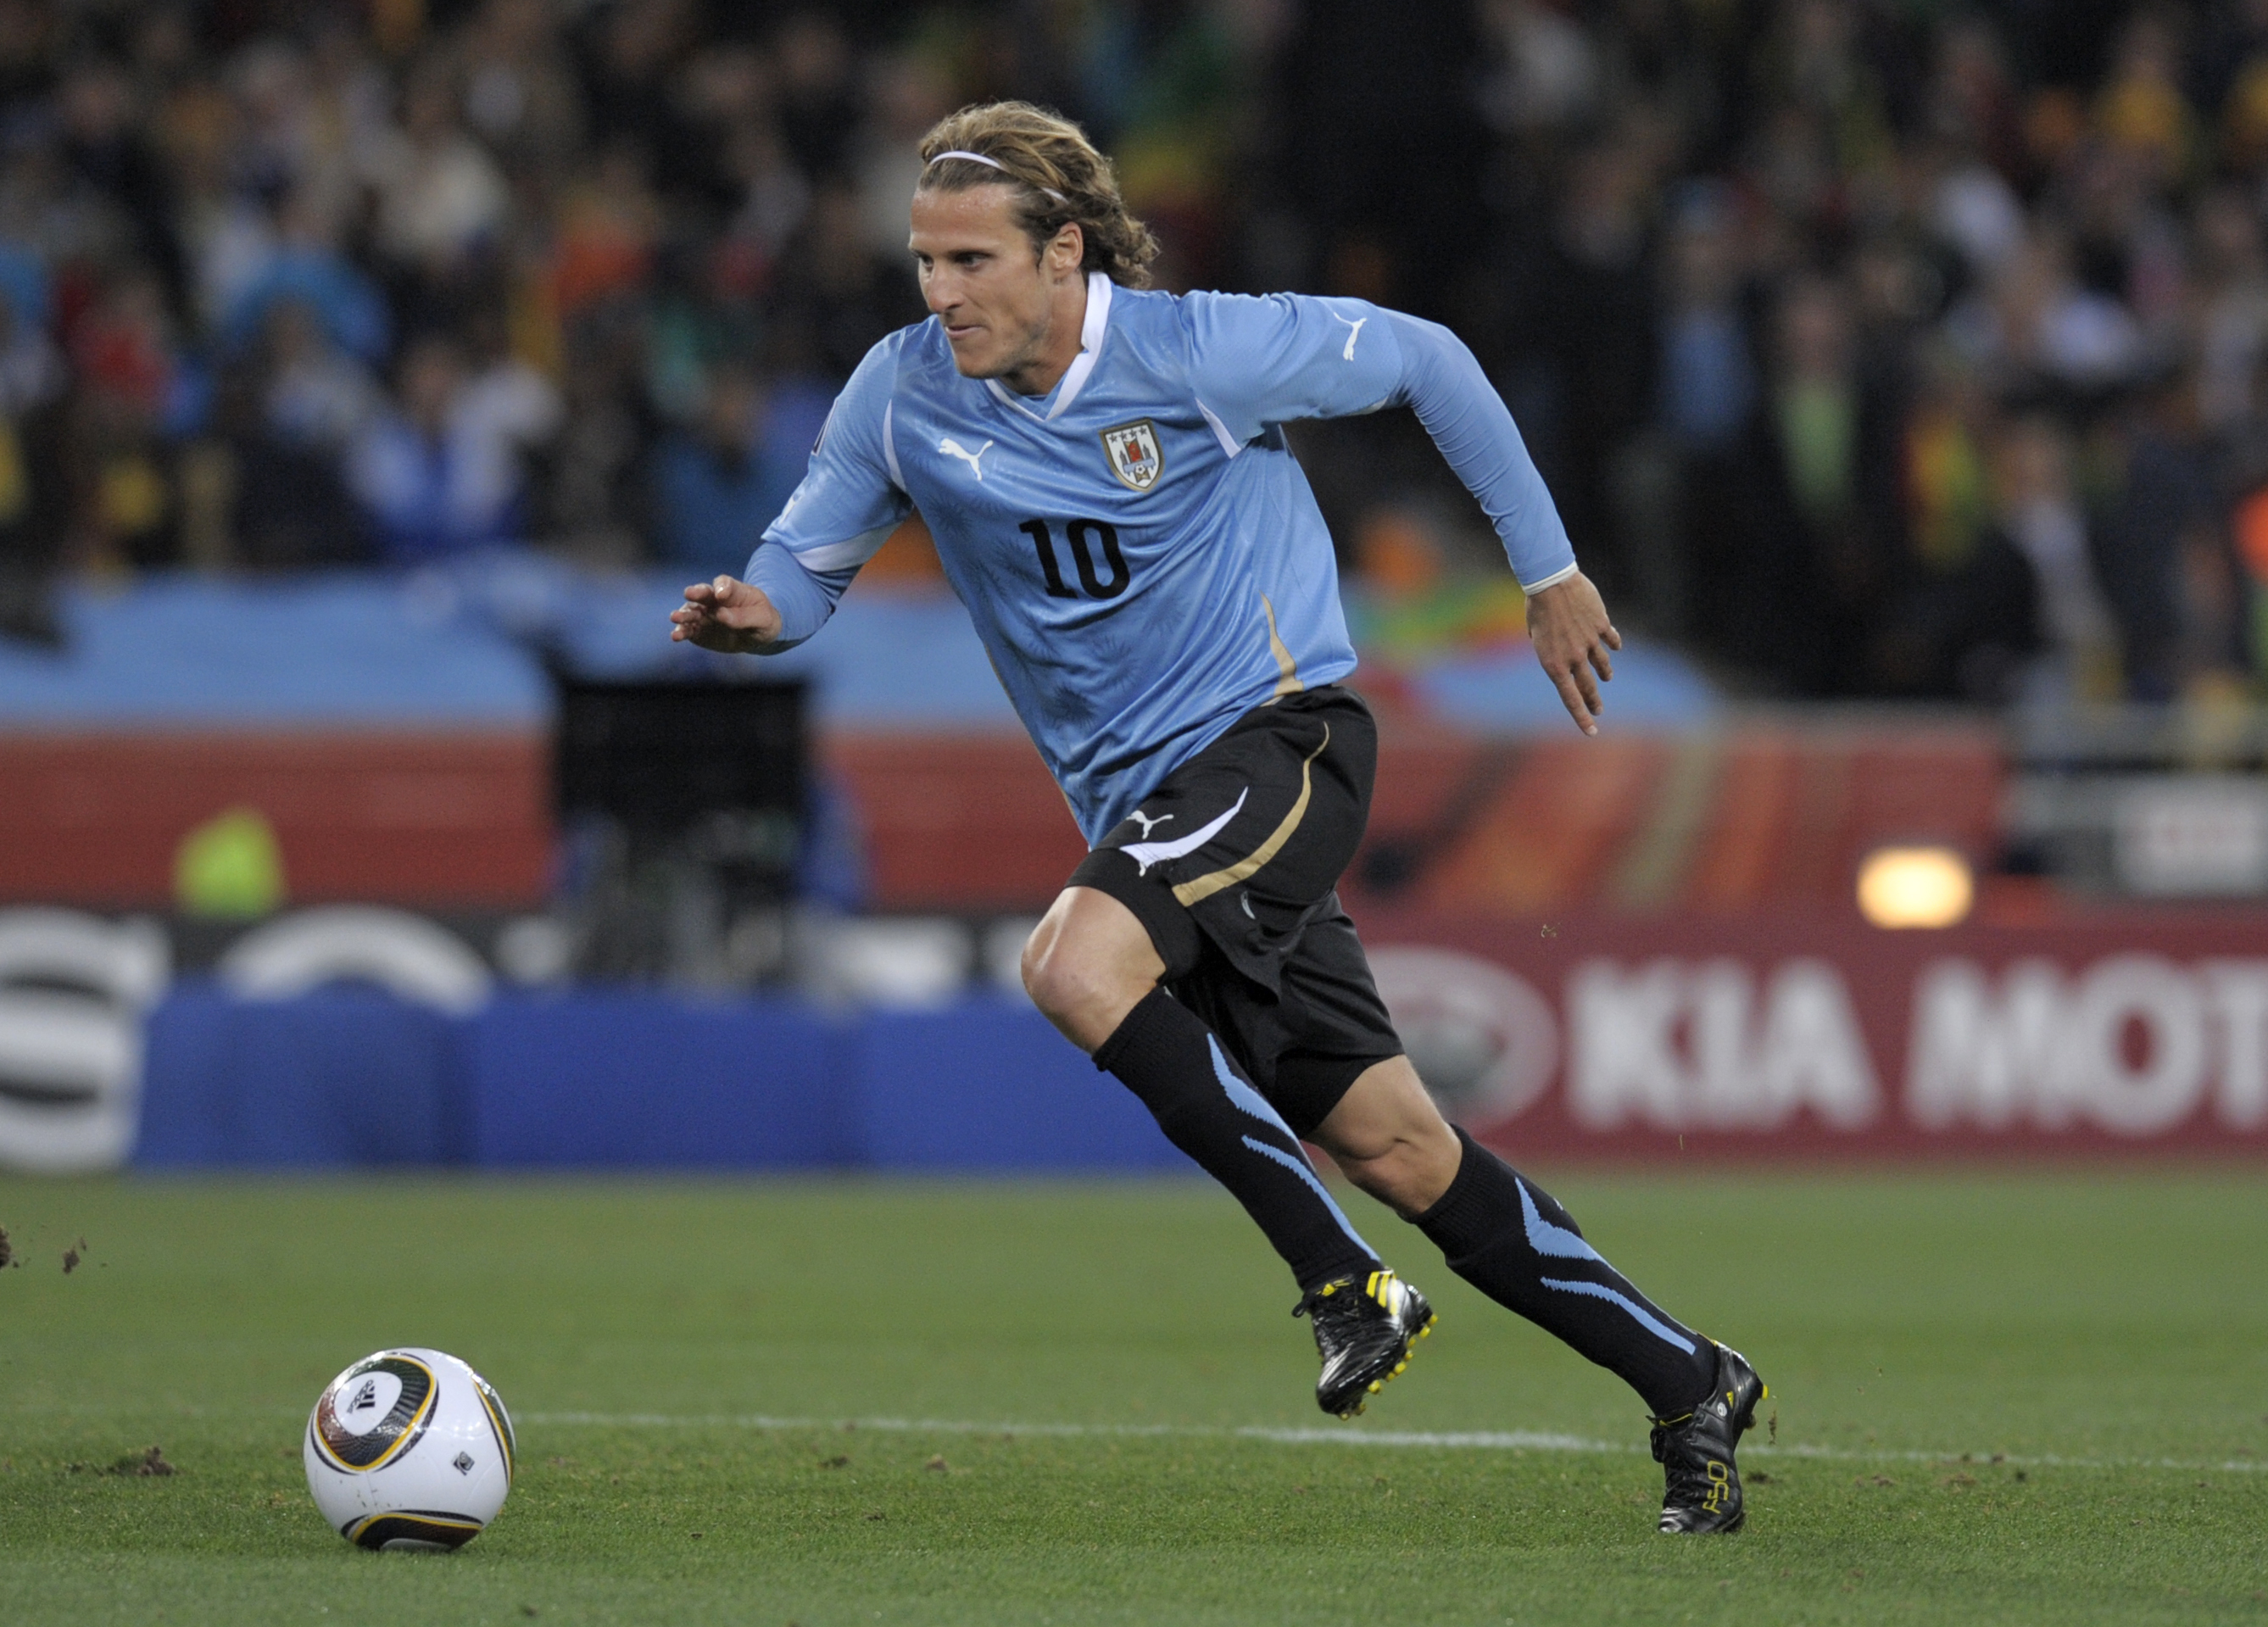 Forlan wins Golden Ball as awards are handed out | SBI Soccer